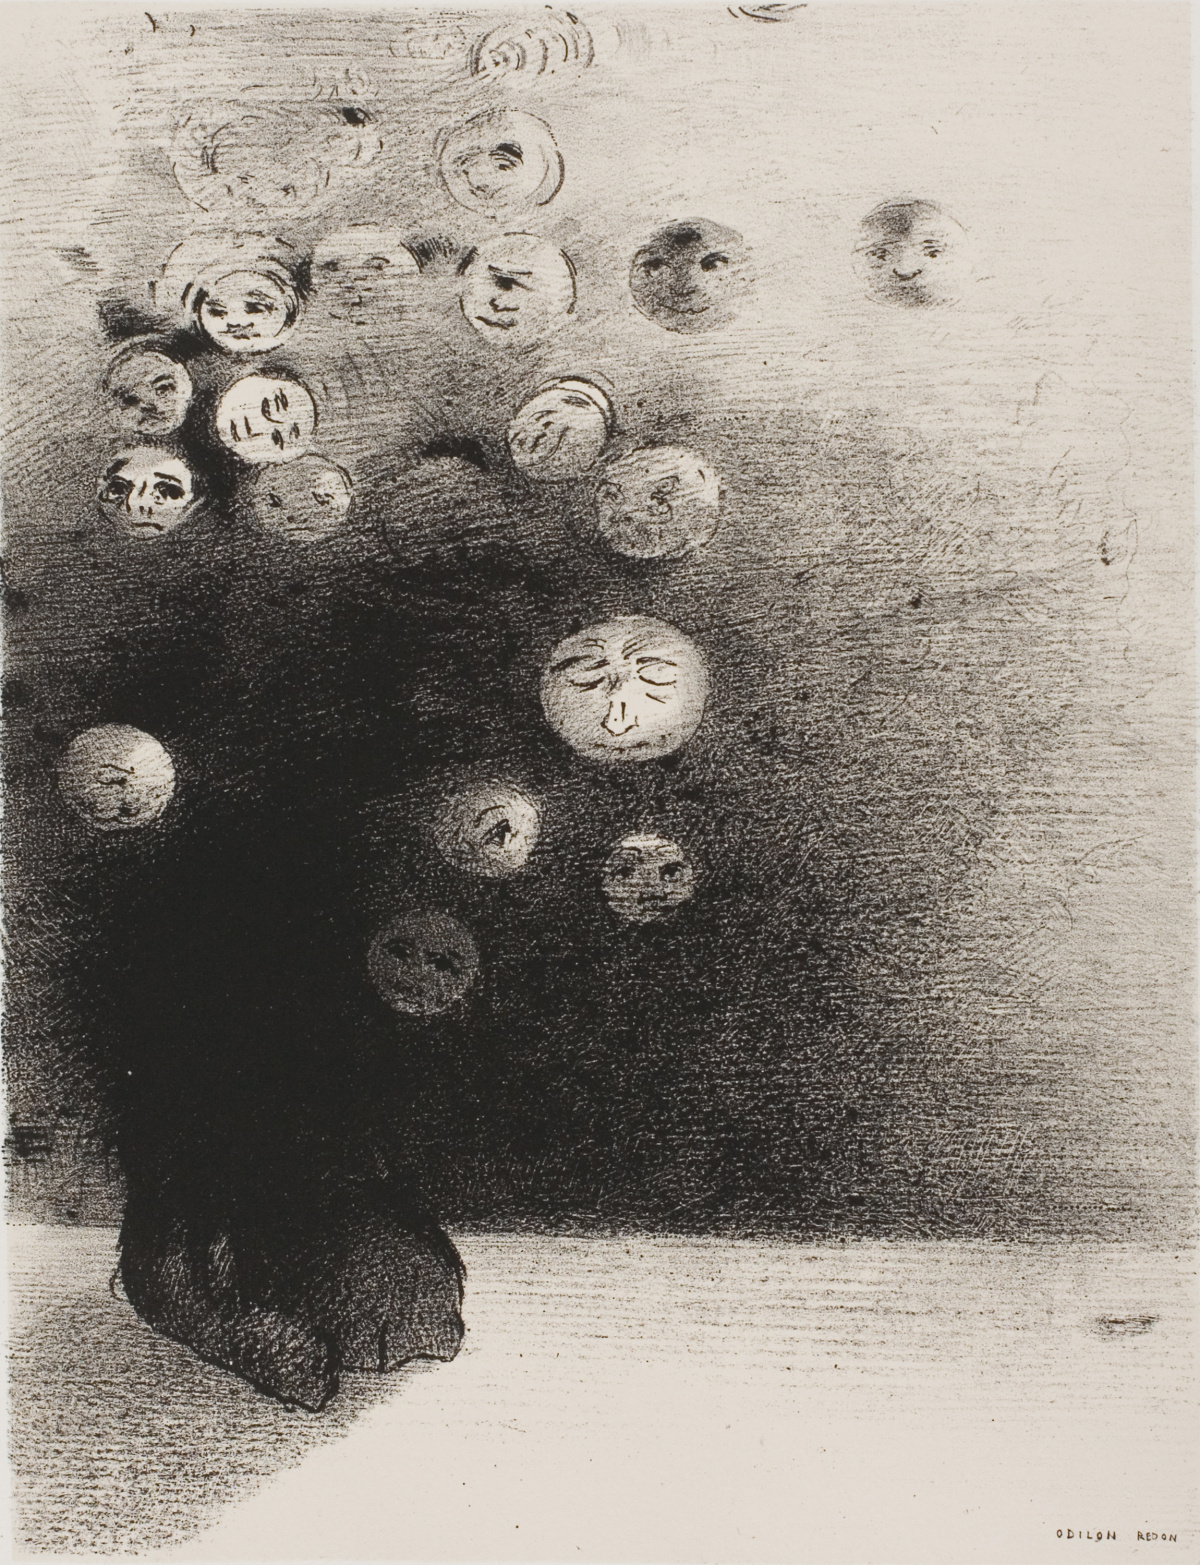 Is There Not an Invisible World, from The Juror (Odilon Redon, The Art Institute of Chicago 1887).